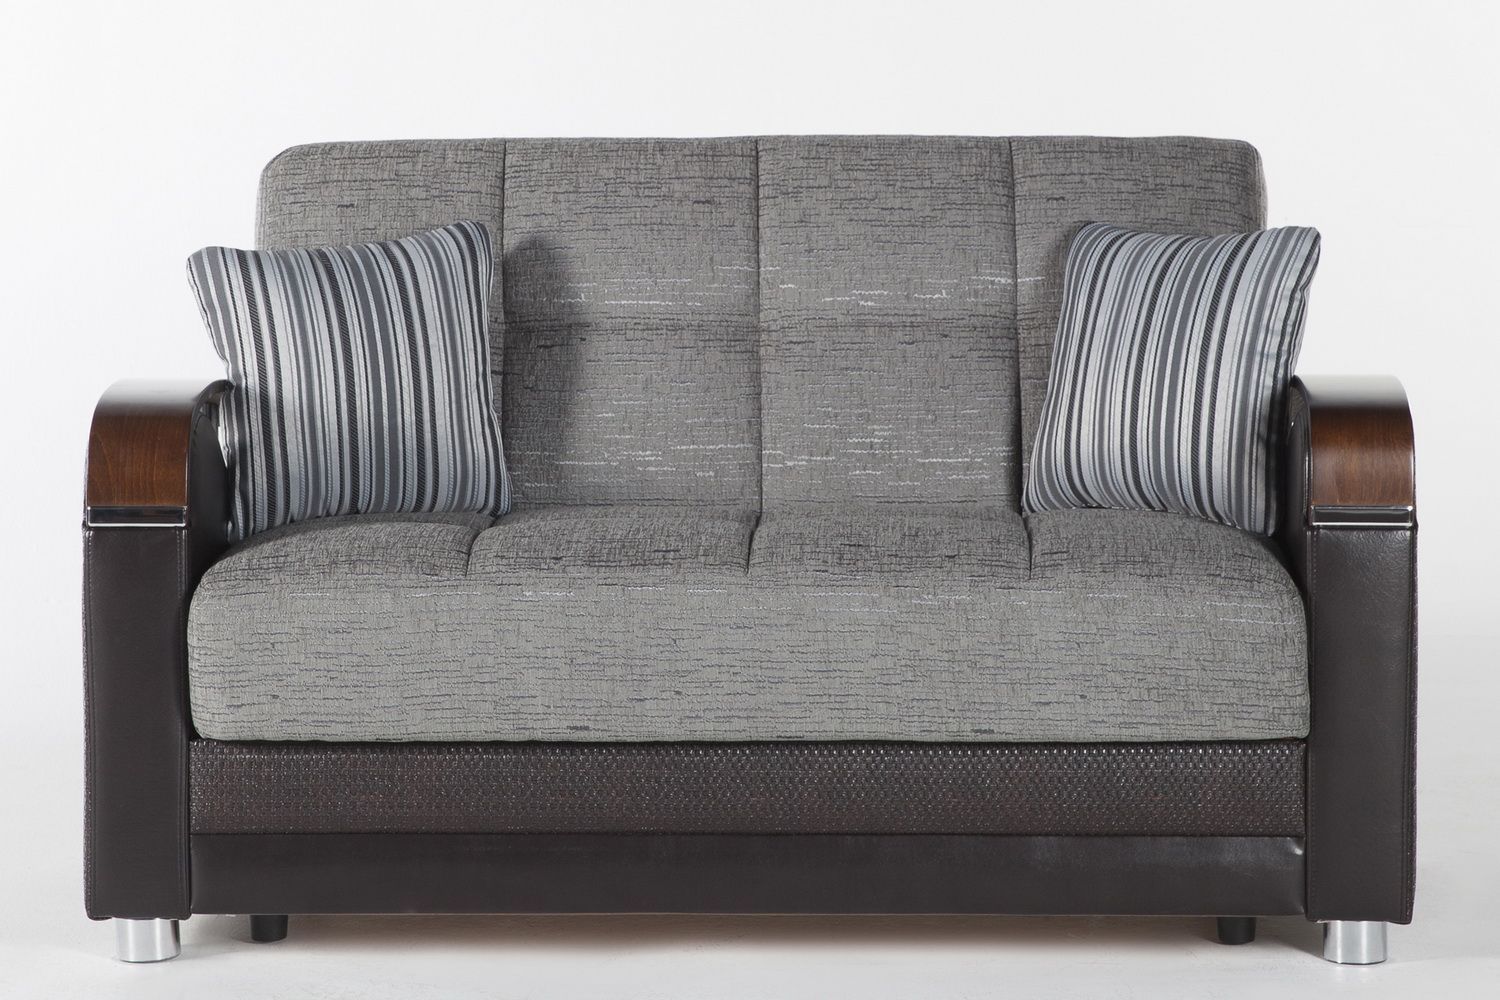 Luna Loveseat Sleeper In Fulya Graytov | Love Seat Throughout Luna Leather Sectional Sofas (View 15 of 15)